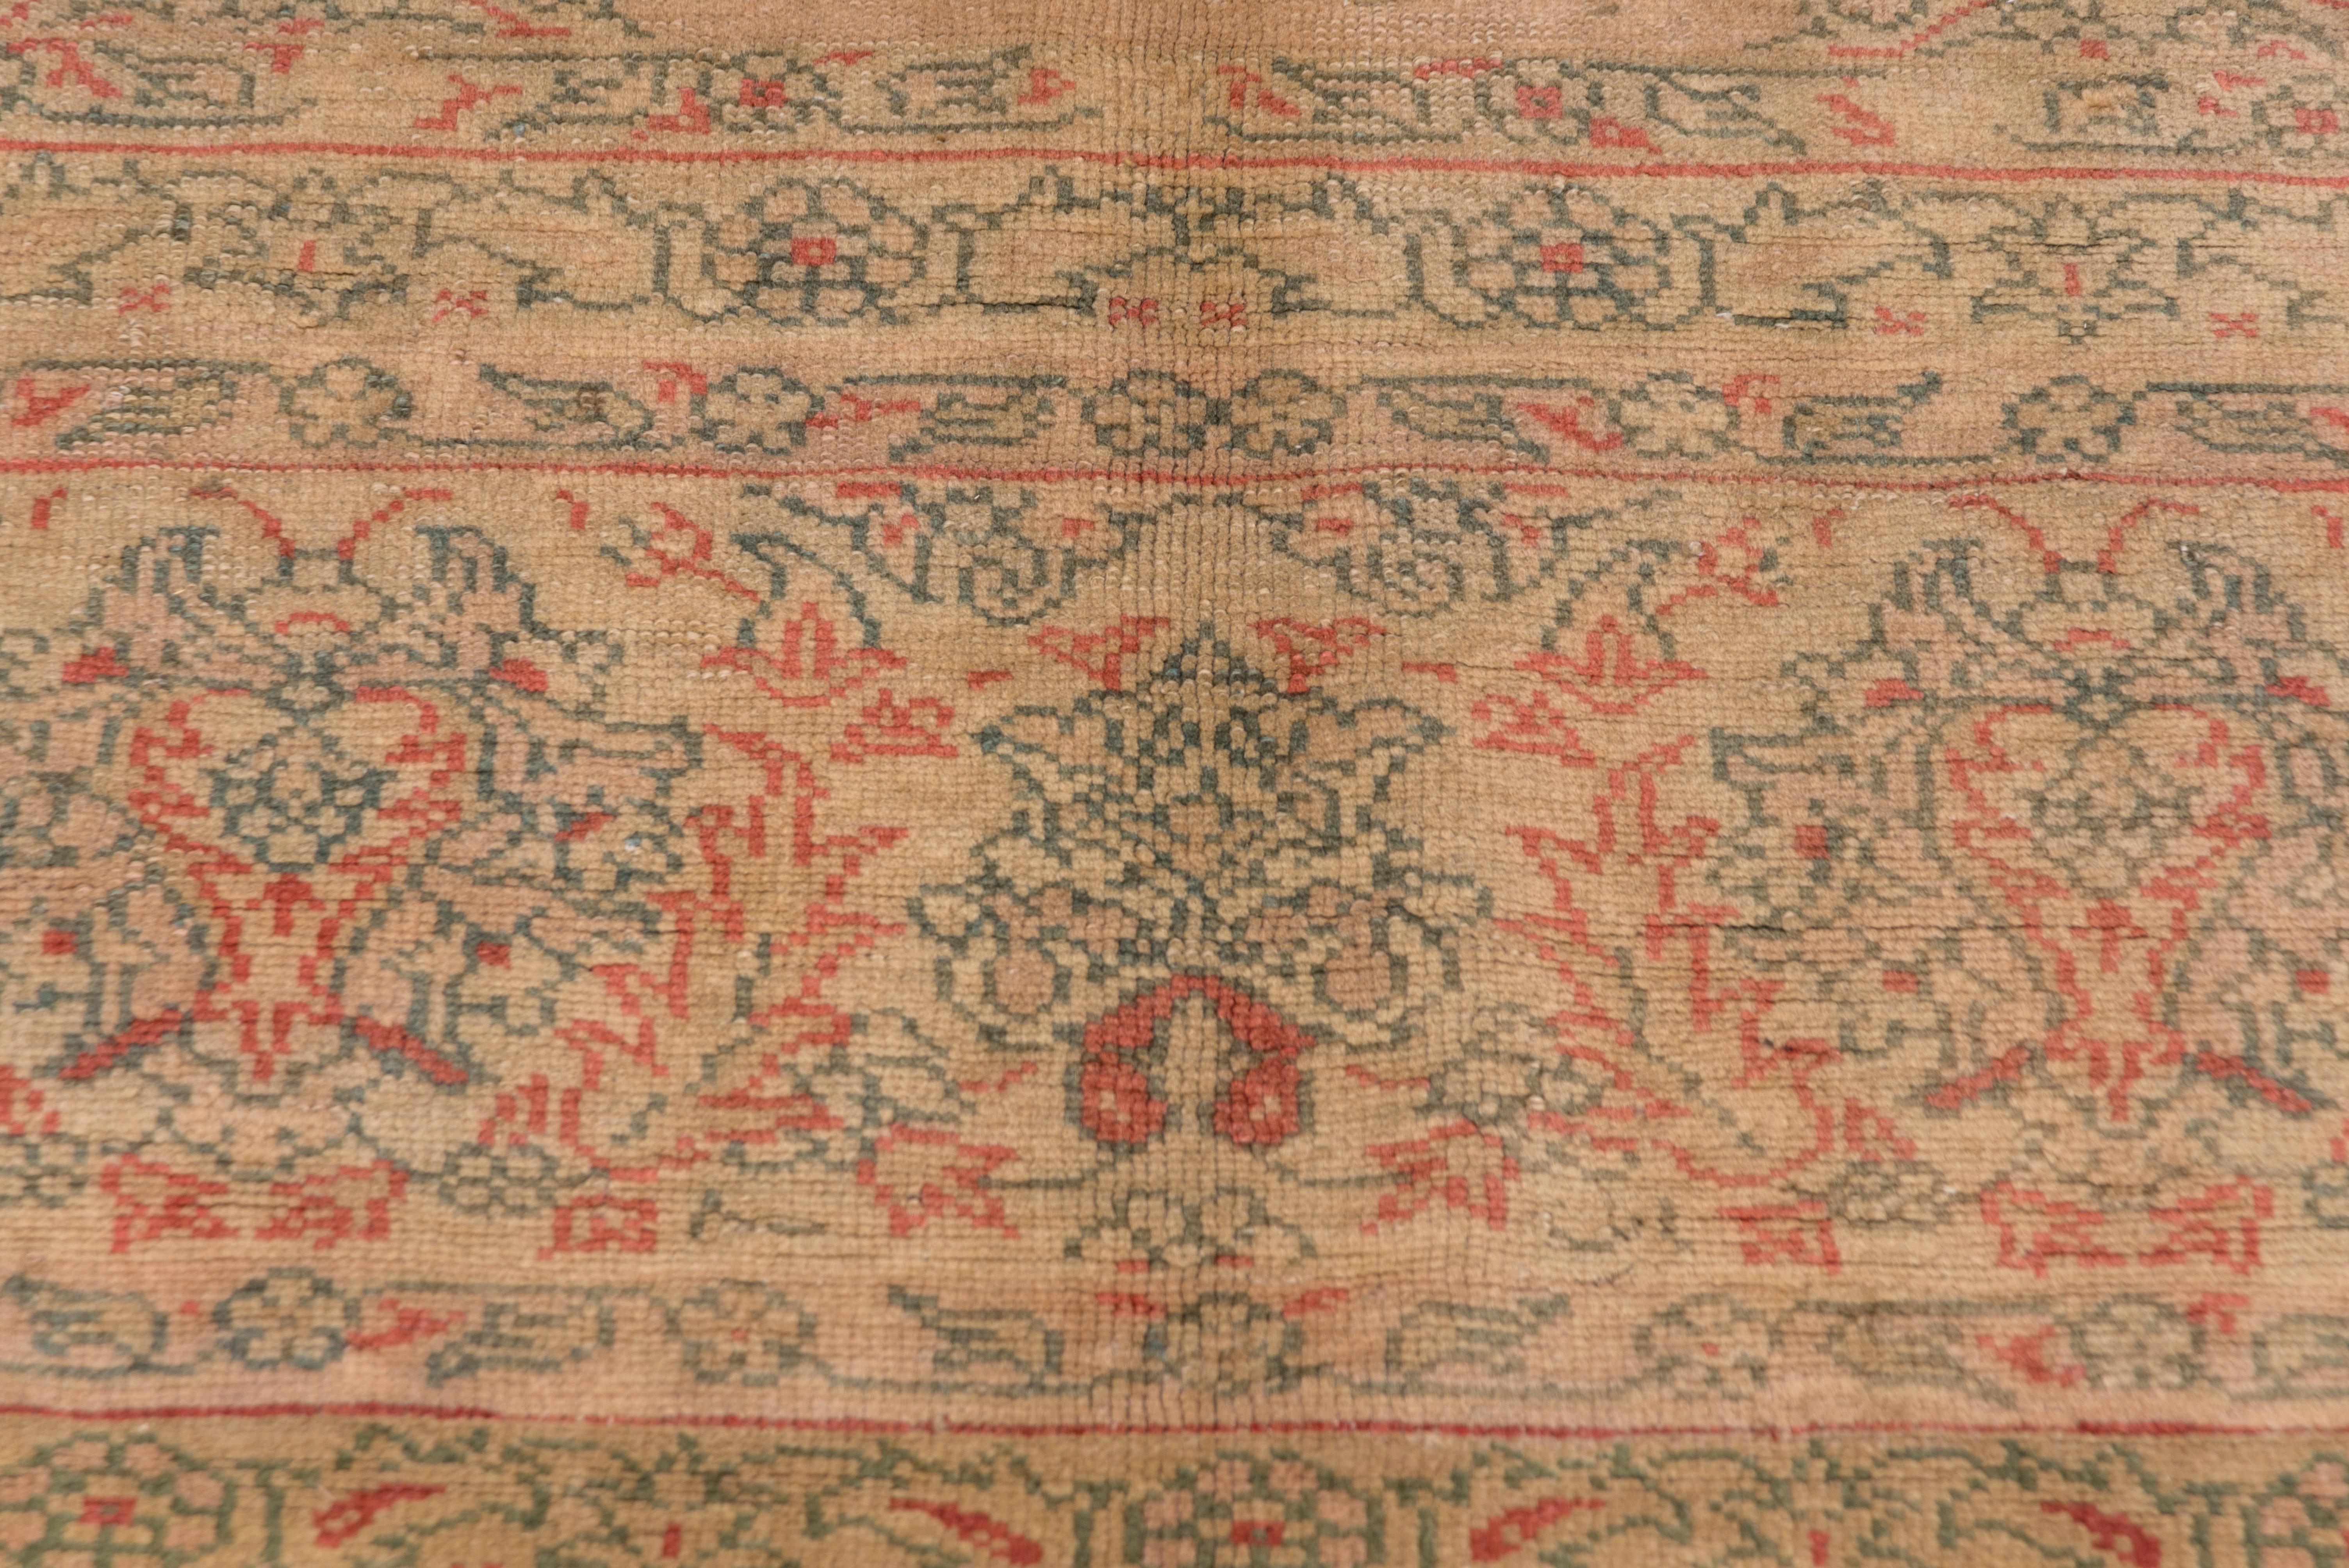 The warm beige field shows a floating doubly pendanted filigree 16-point medallion enclosing palmettes. En suite extended corners. Border with well-drawn reversing palmettes. Fairly good condition with general light wear. Green and light red accents.